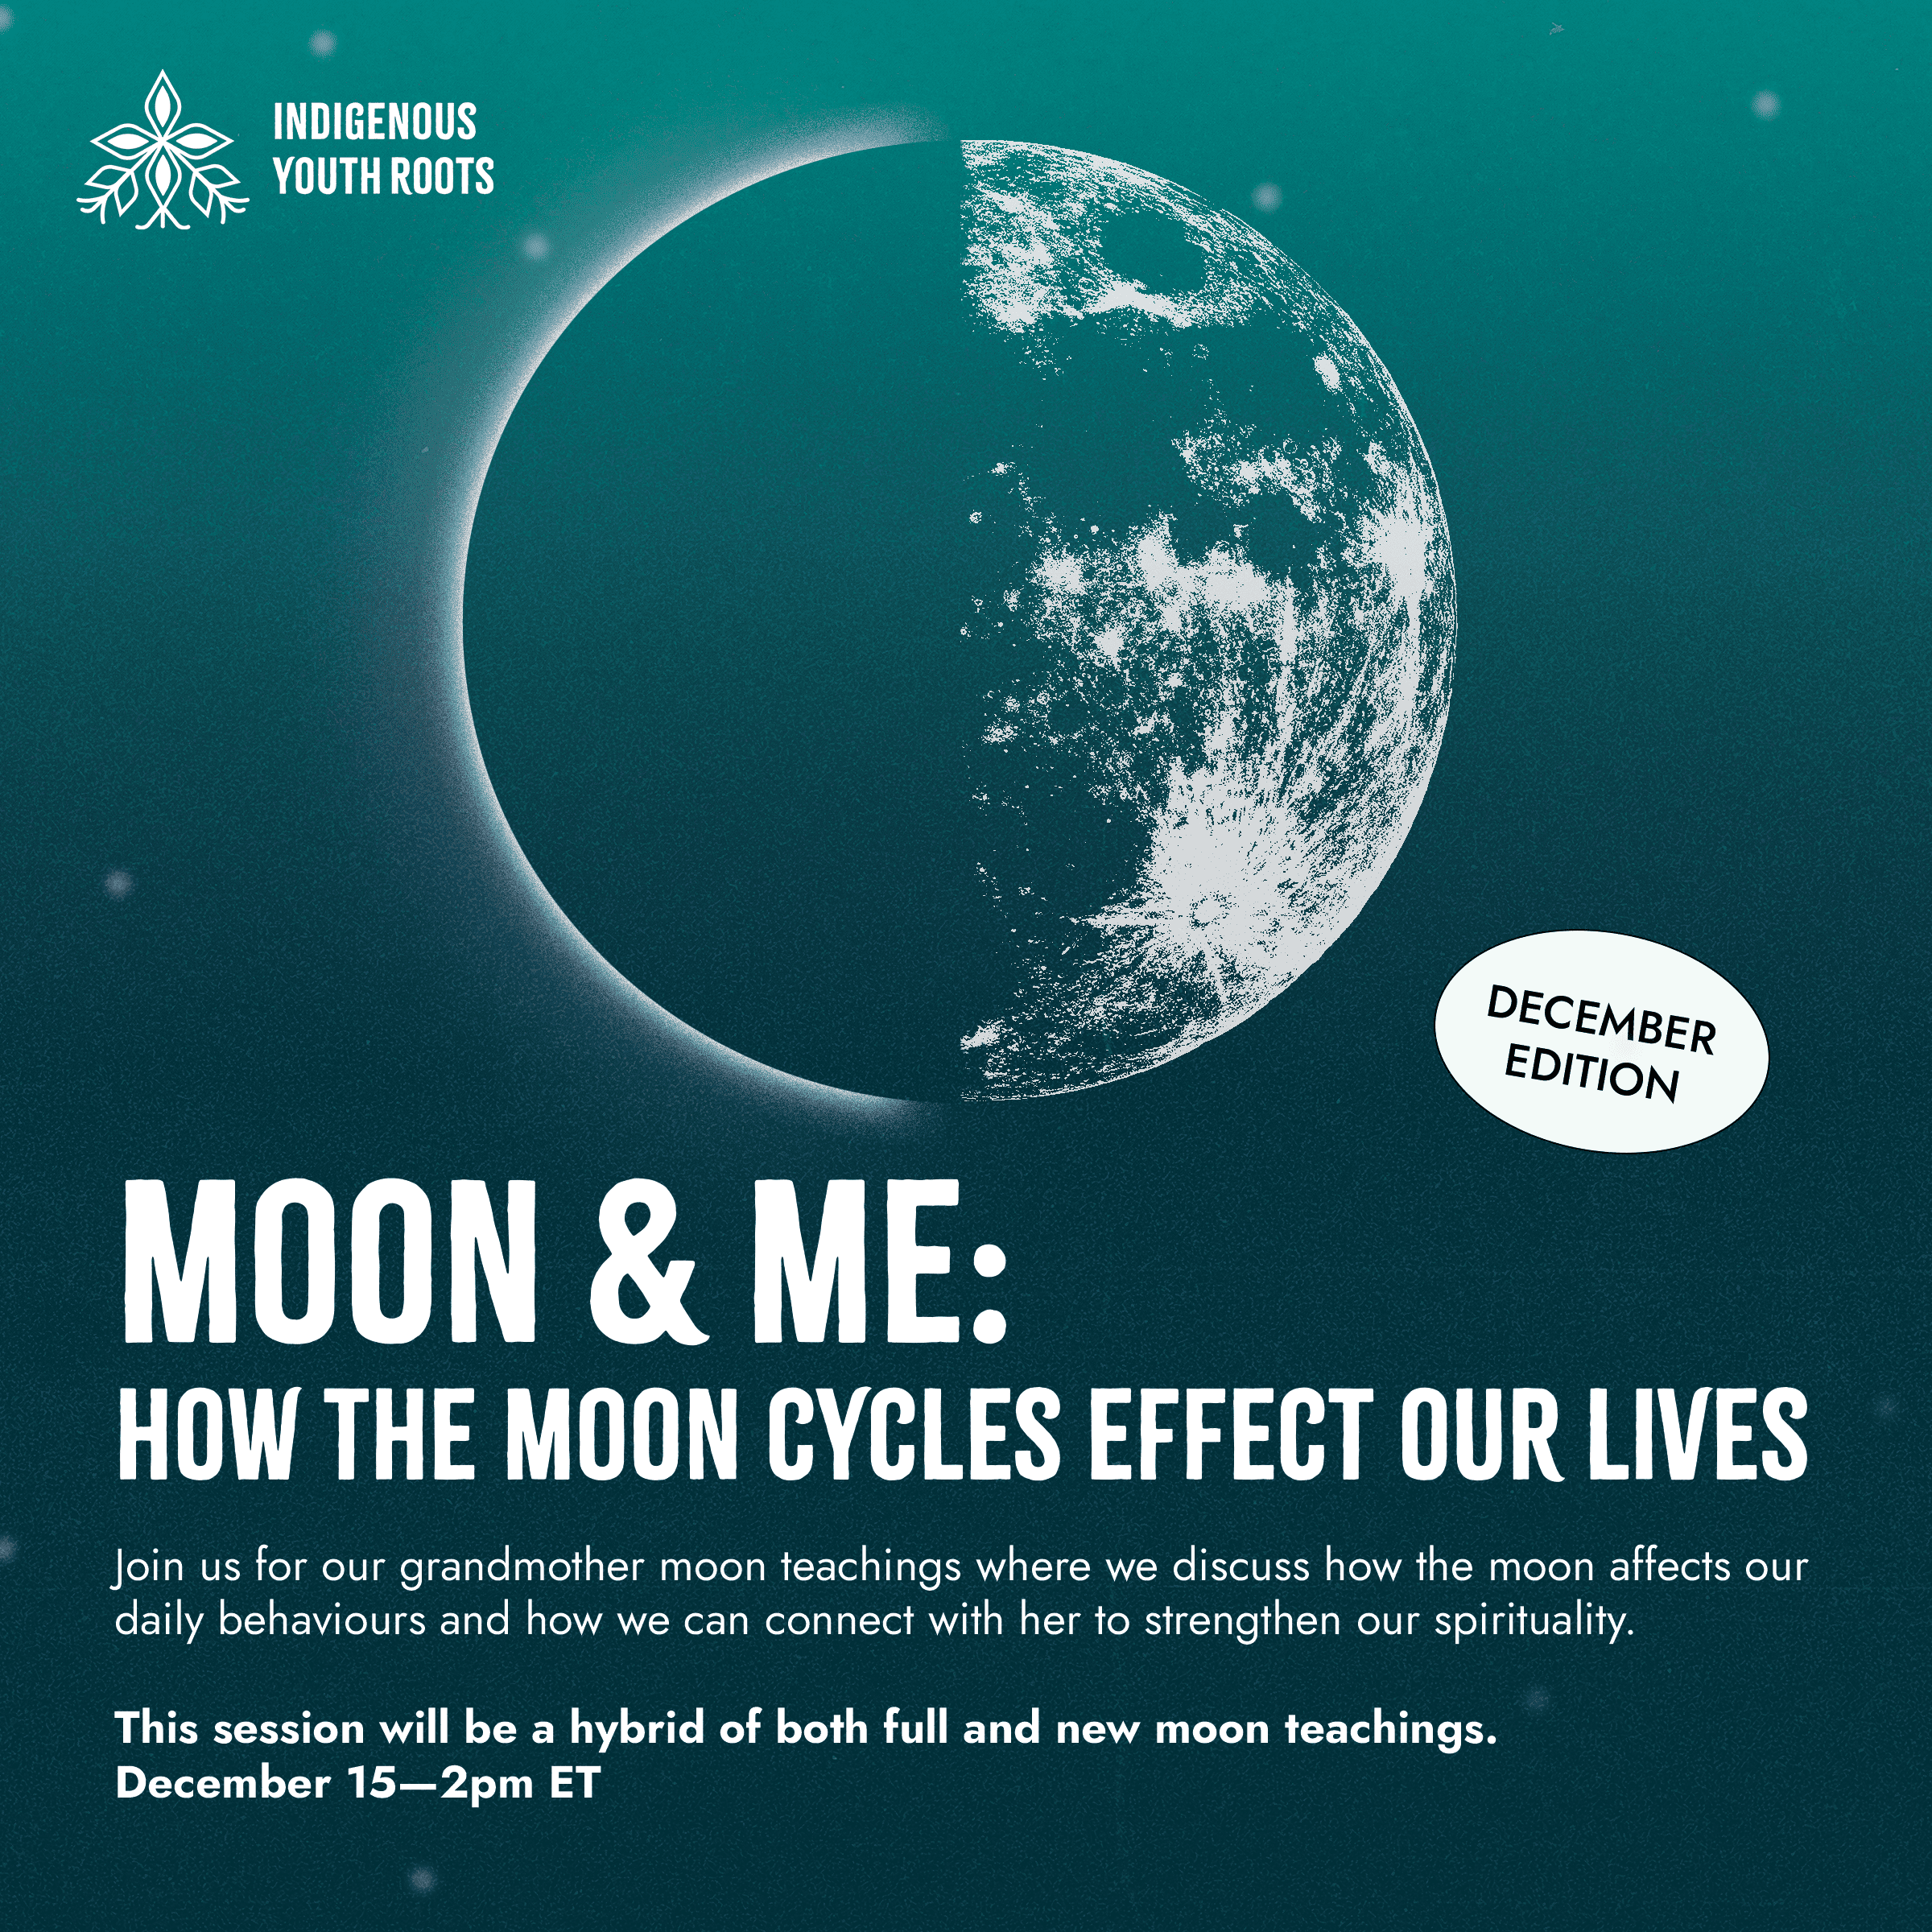 Event for Moon & Me session which will take places December 15th at 2PM ET